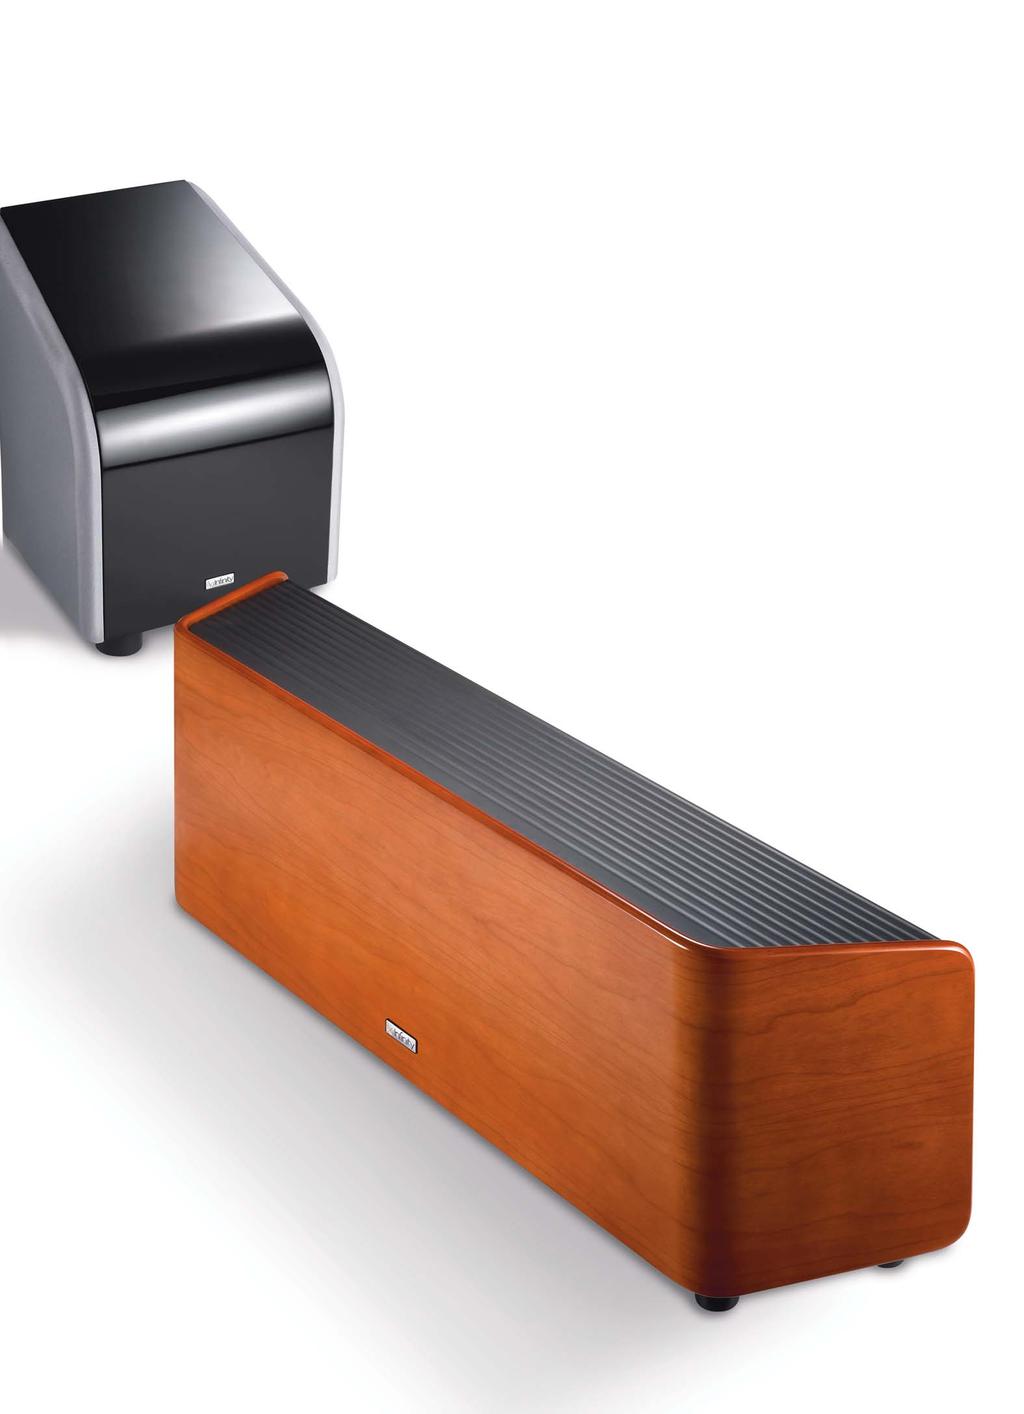 High-Gloss Black BEYOND THE BOX. The first Infinity speaker system was also the first in the industry to include a powered subwoofer.